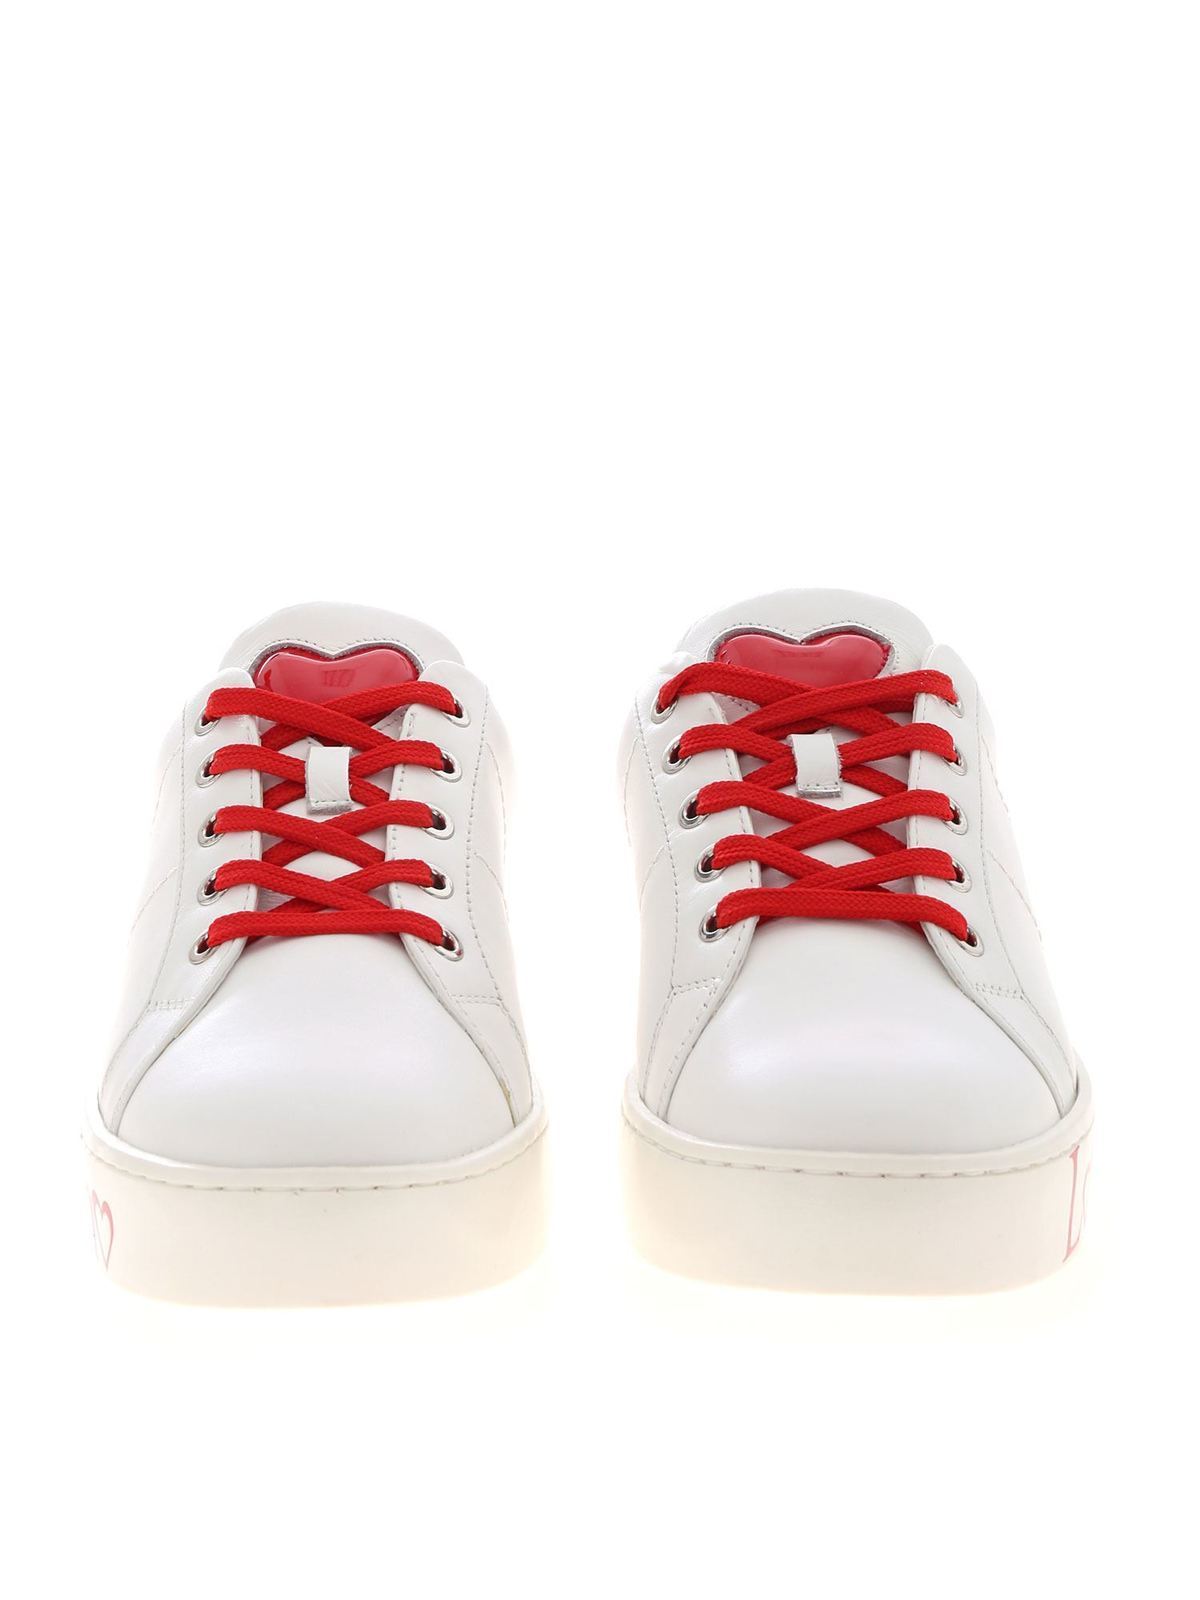 sneakers bianche e rosse